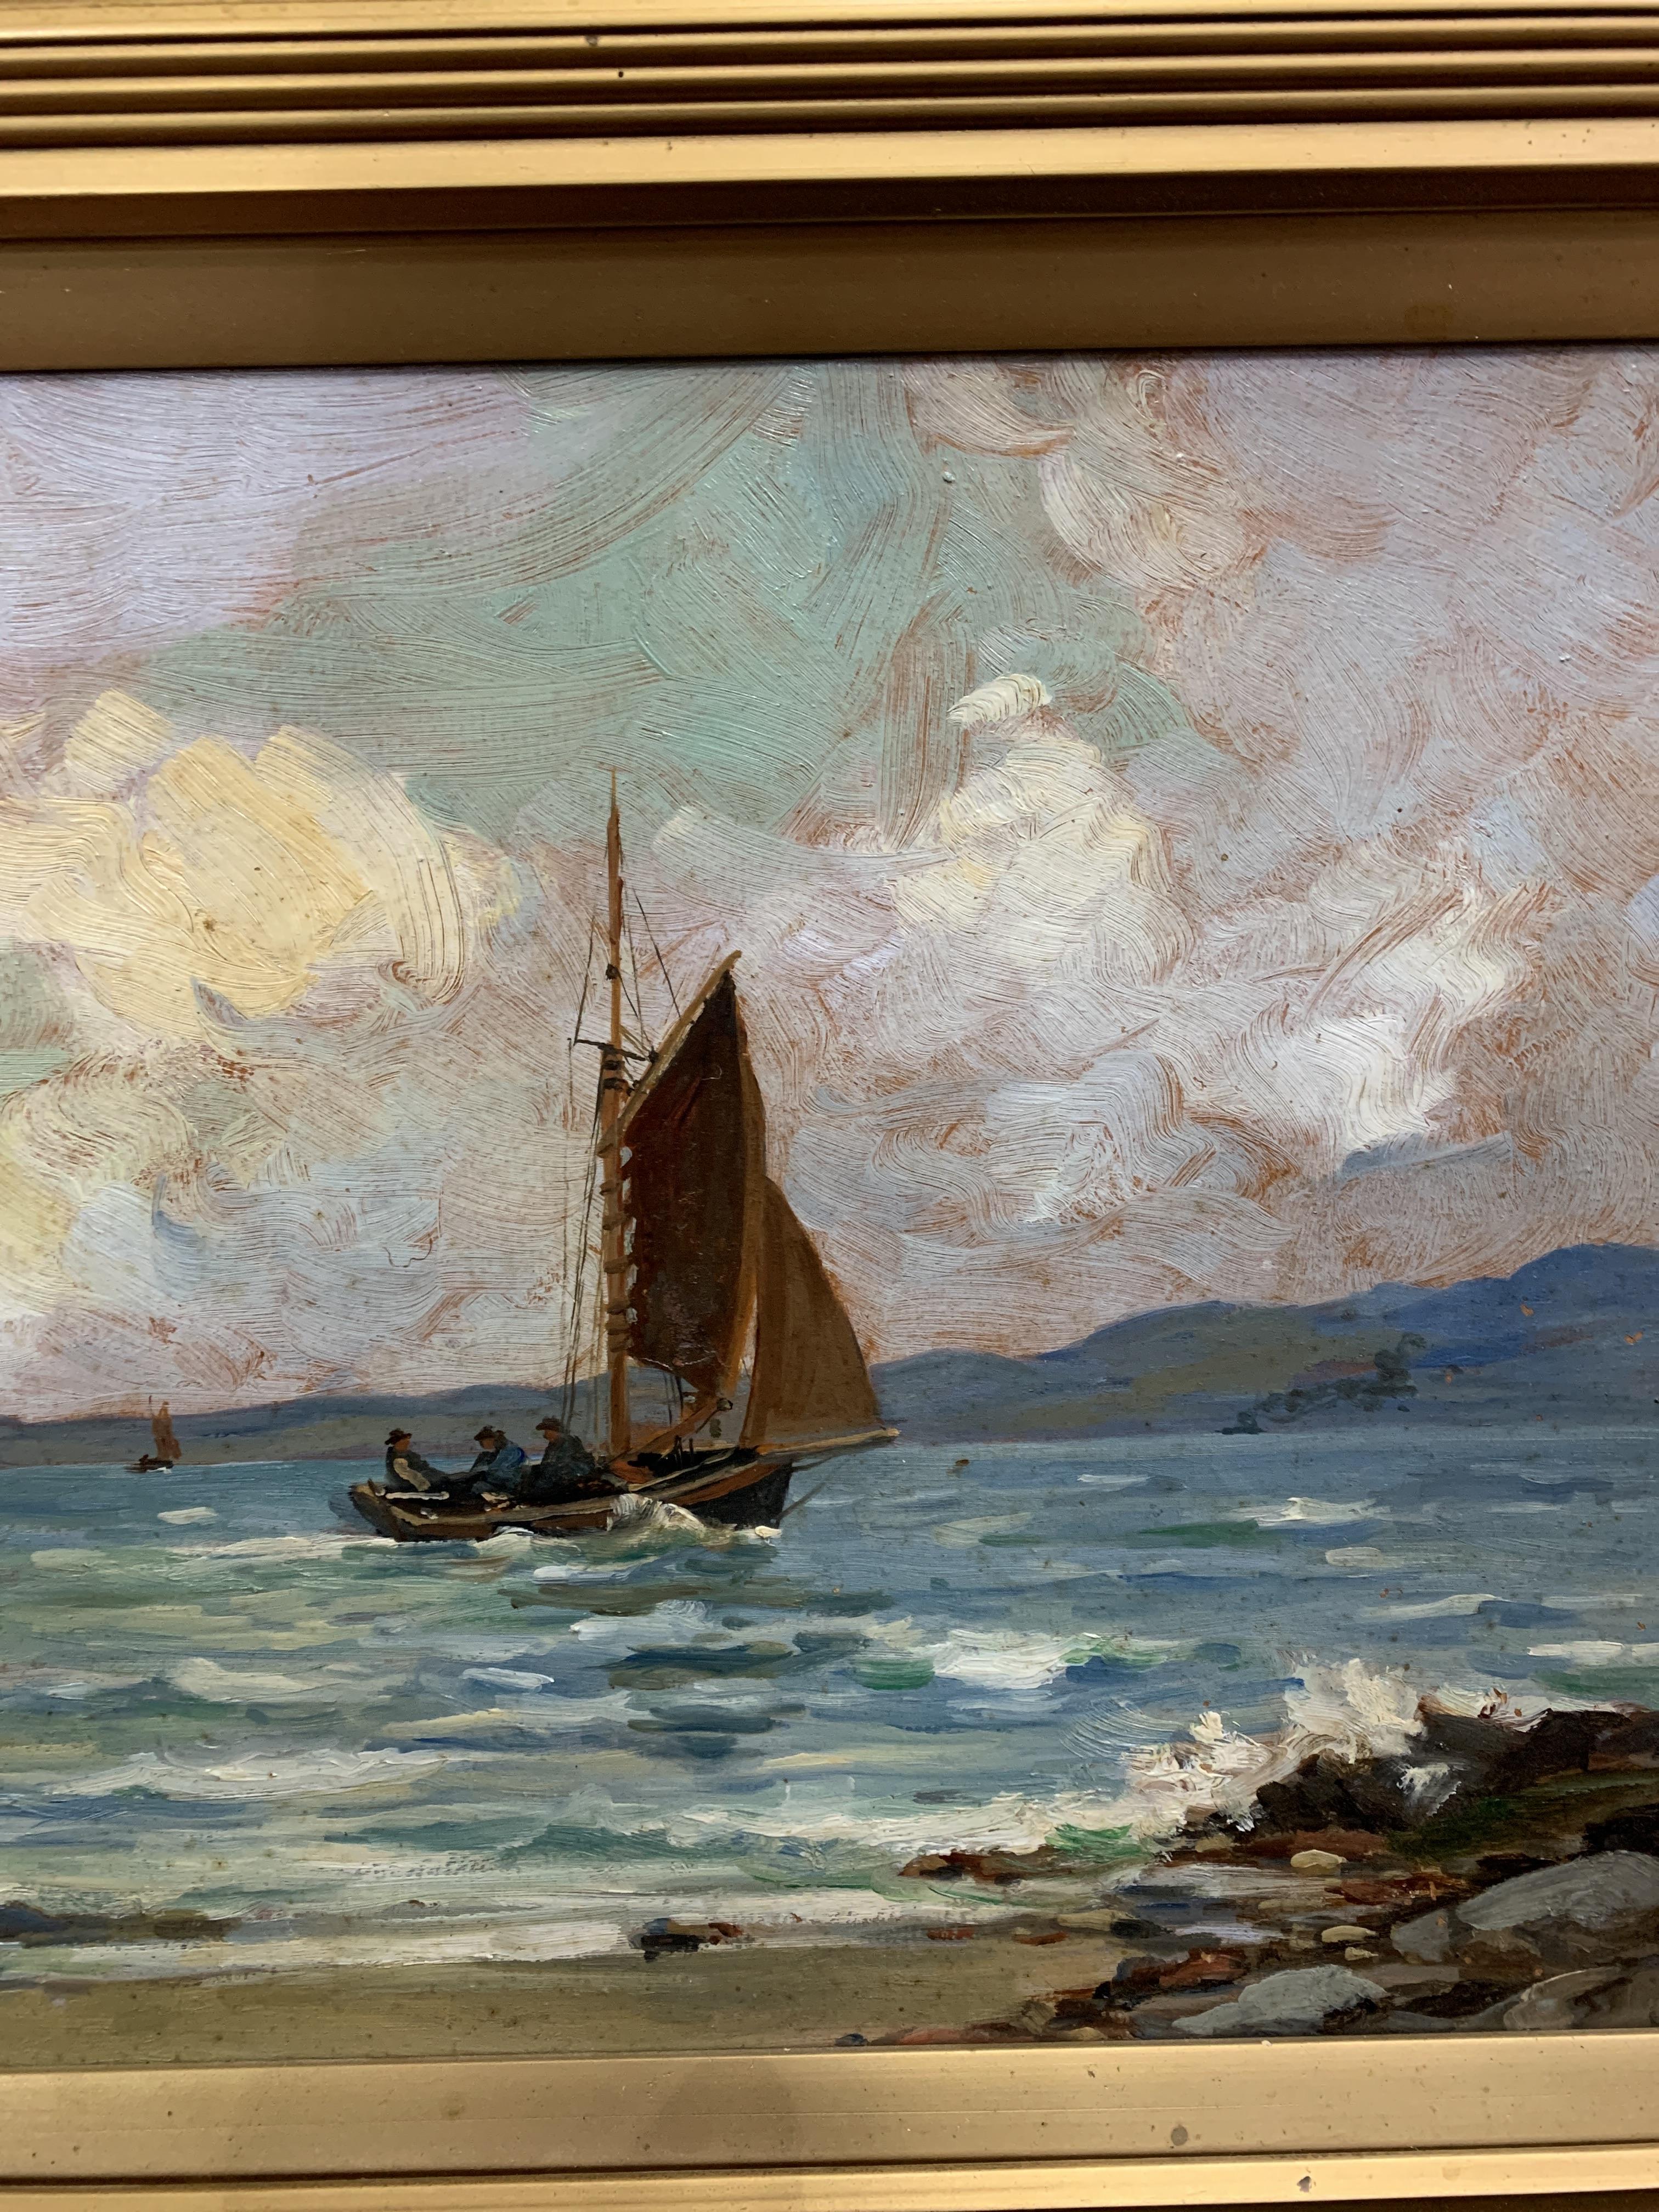 LOCH SAILING, AN OIL BY DAVID MARTIN - Image 7 of 8